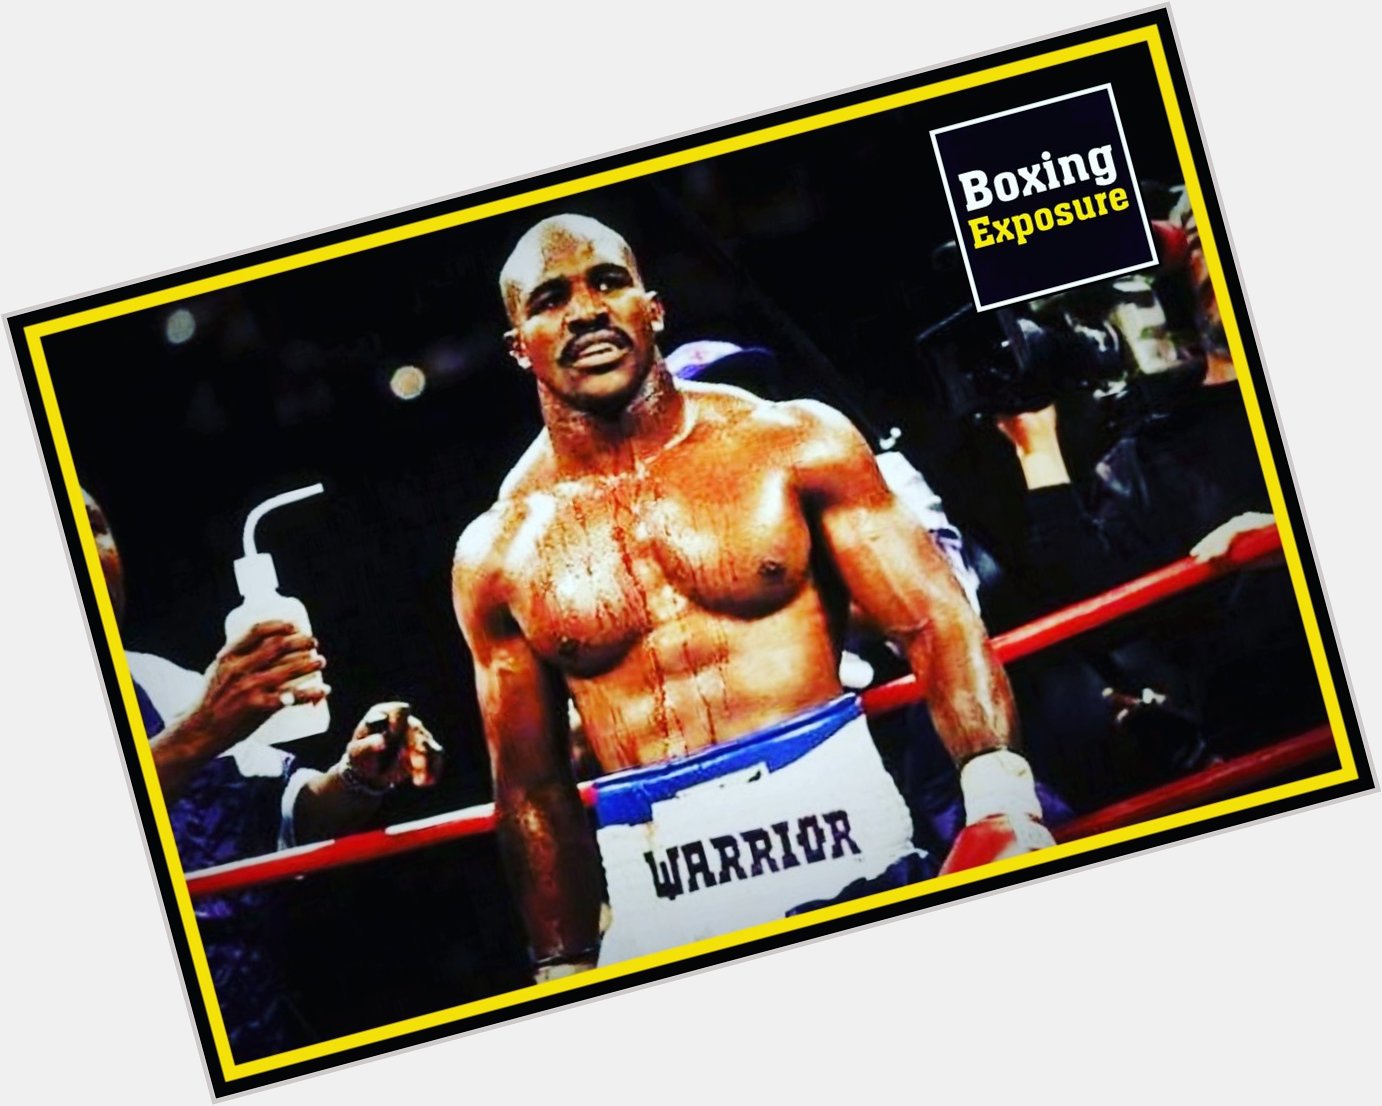 Happy Birthday to Evander Holyfield.
The \Real Deal\ turns 56 today! 

What\s your favourite Holyfield moment? 